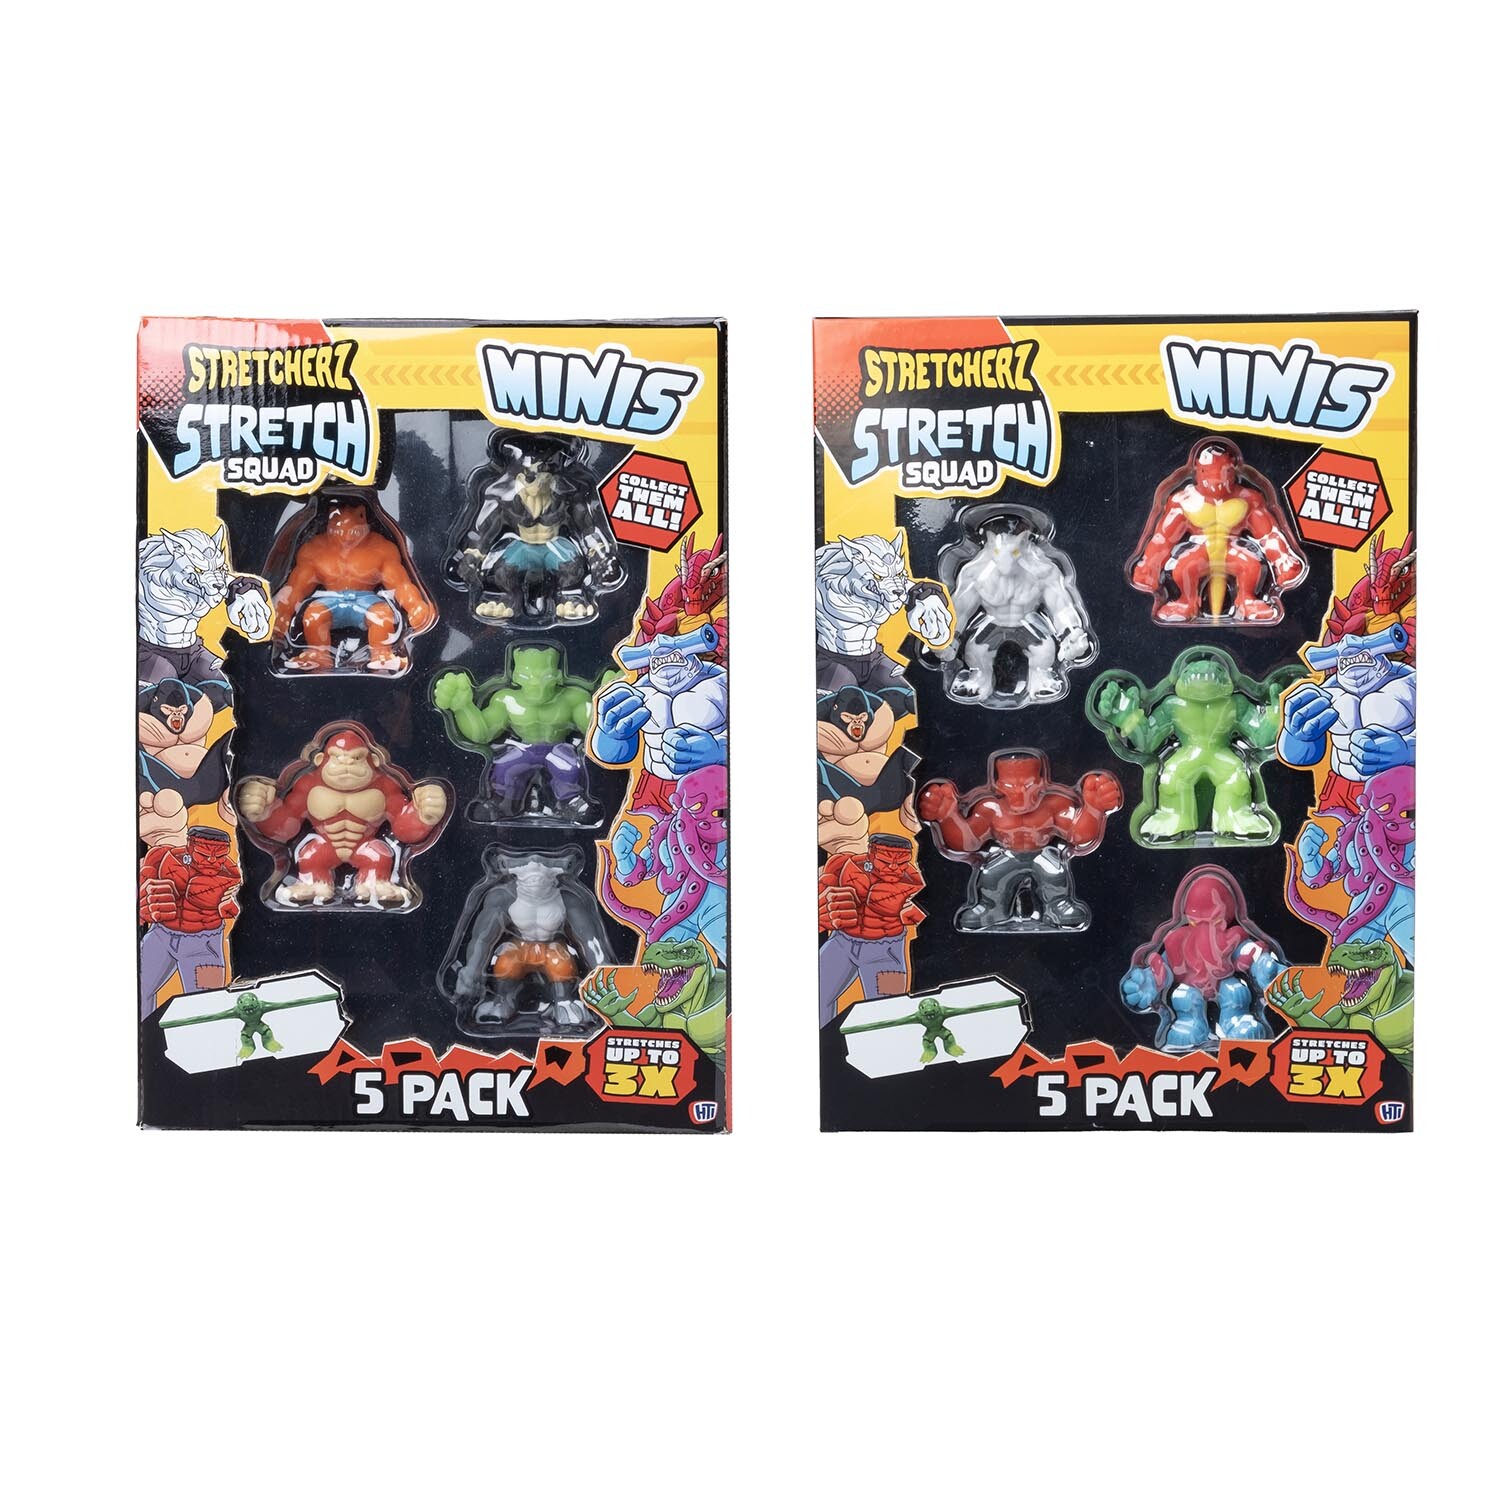 5 Pack Stretch Squad Minis - Yellow Image 3